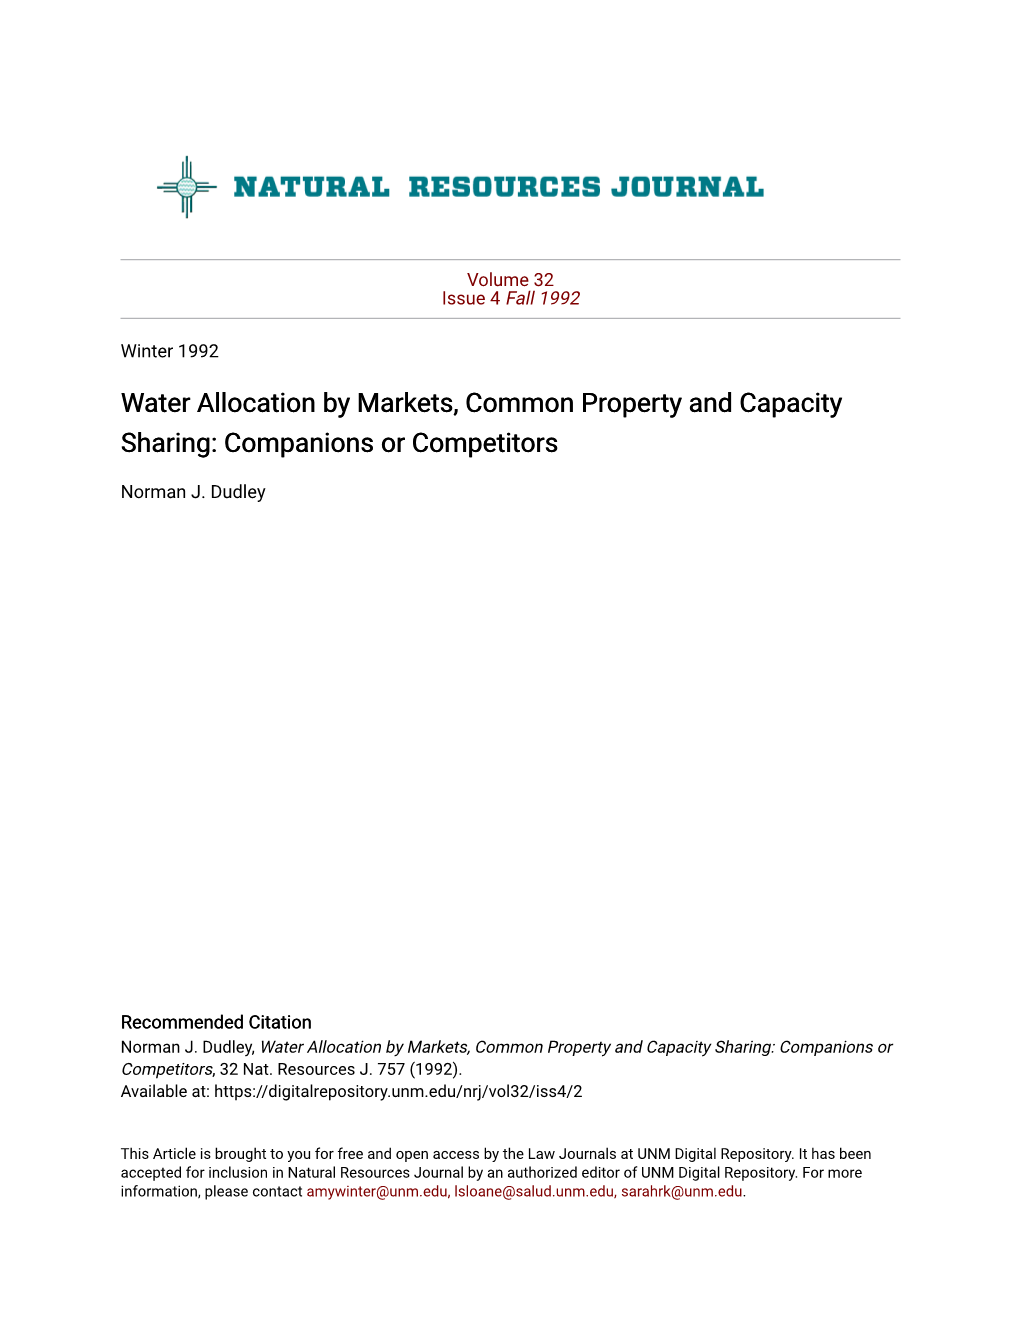 Water Allocation by Markets, Common Property and Capacity Sharing: Companions Or Competitors